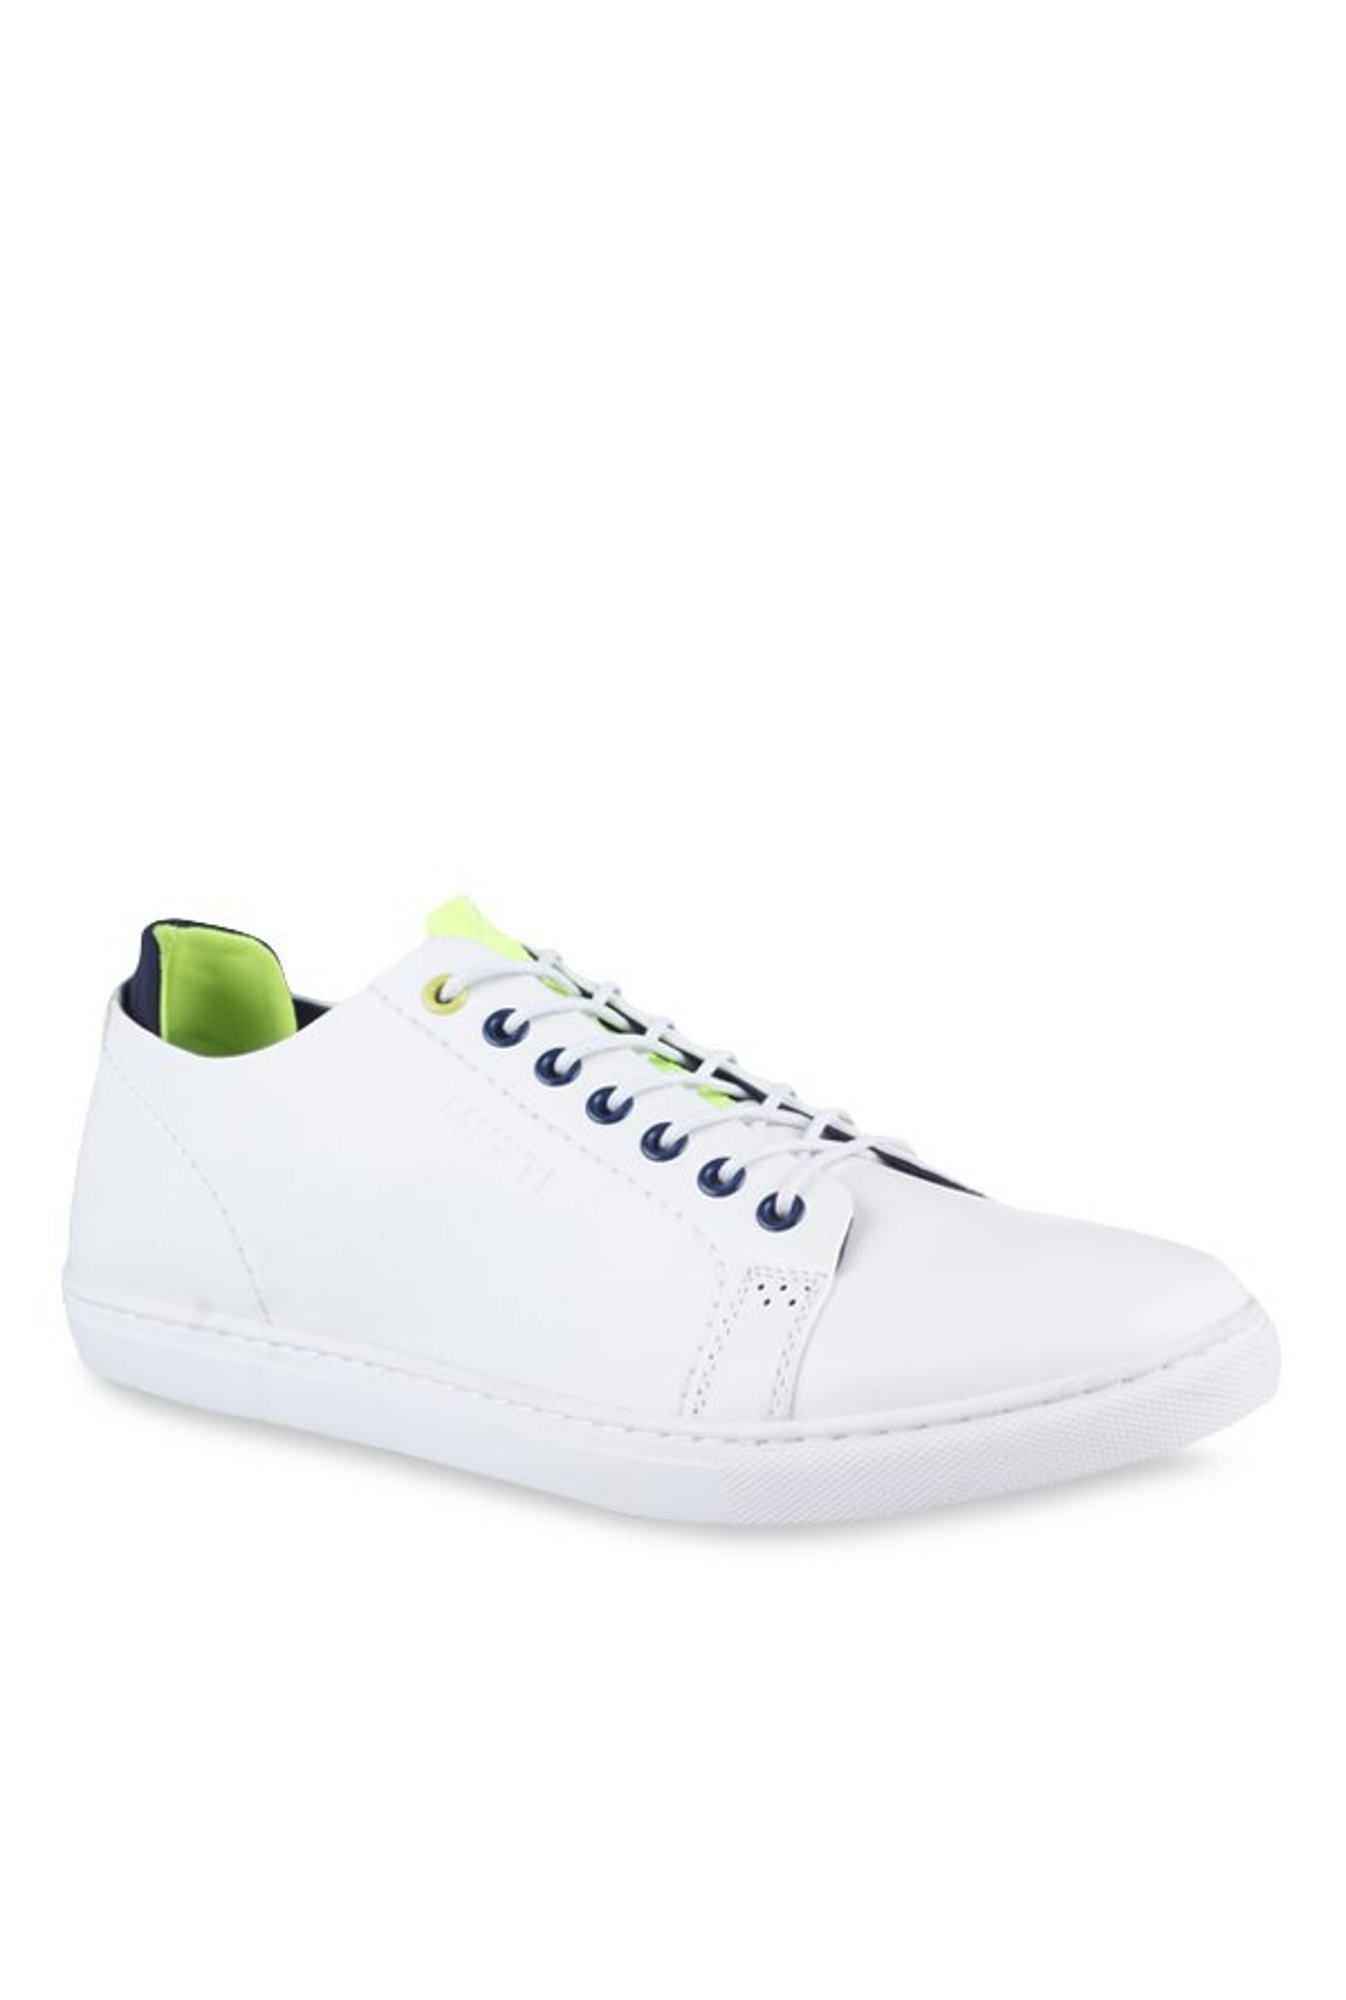 Mufti White Casual Sneakers from Mufti 